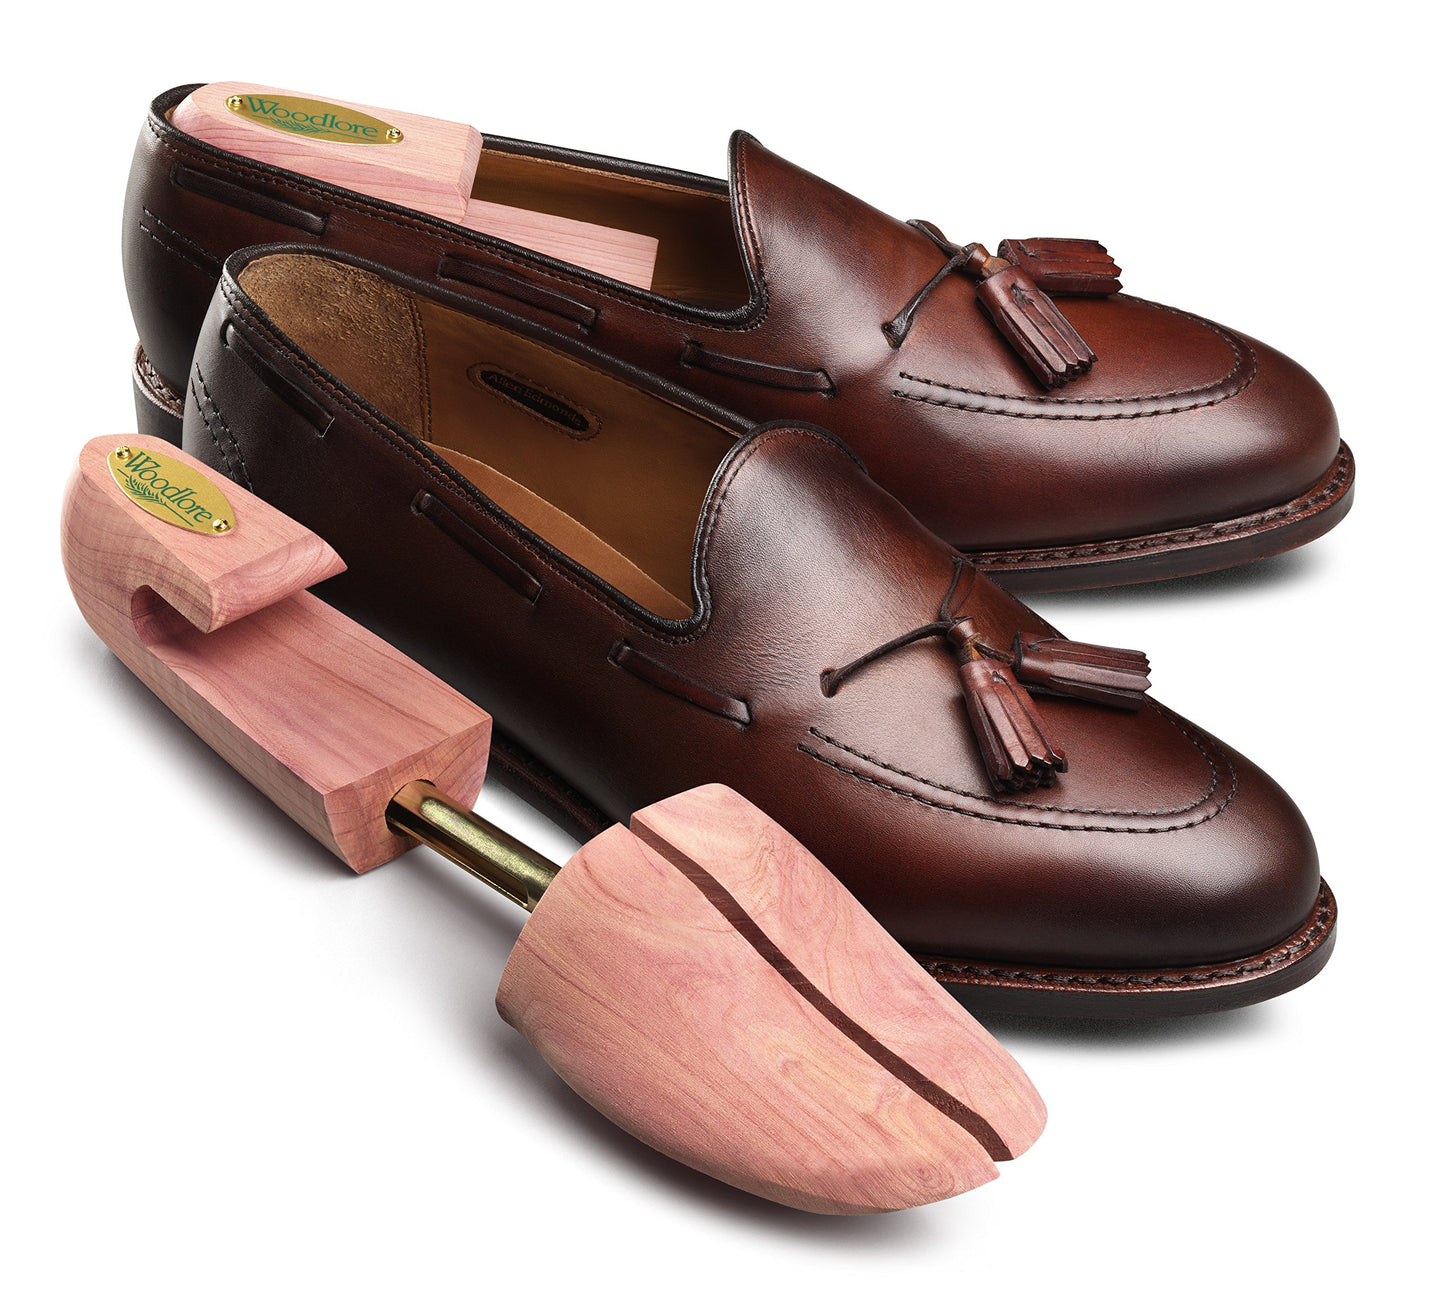 Allen Edmonds Woodlore Shoe Trees for Men 2-Pack Men's Combination Aromatic Red Cedar Shoe Trees (for Two Pairs of Shoes) Made in The USA (Medium / 9-10, Cedar)